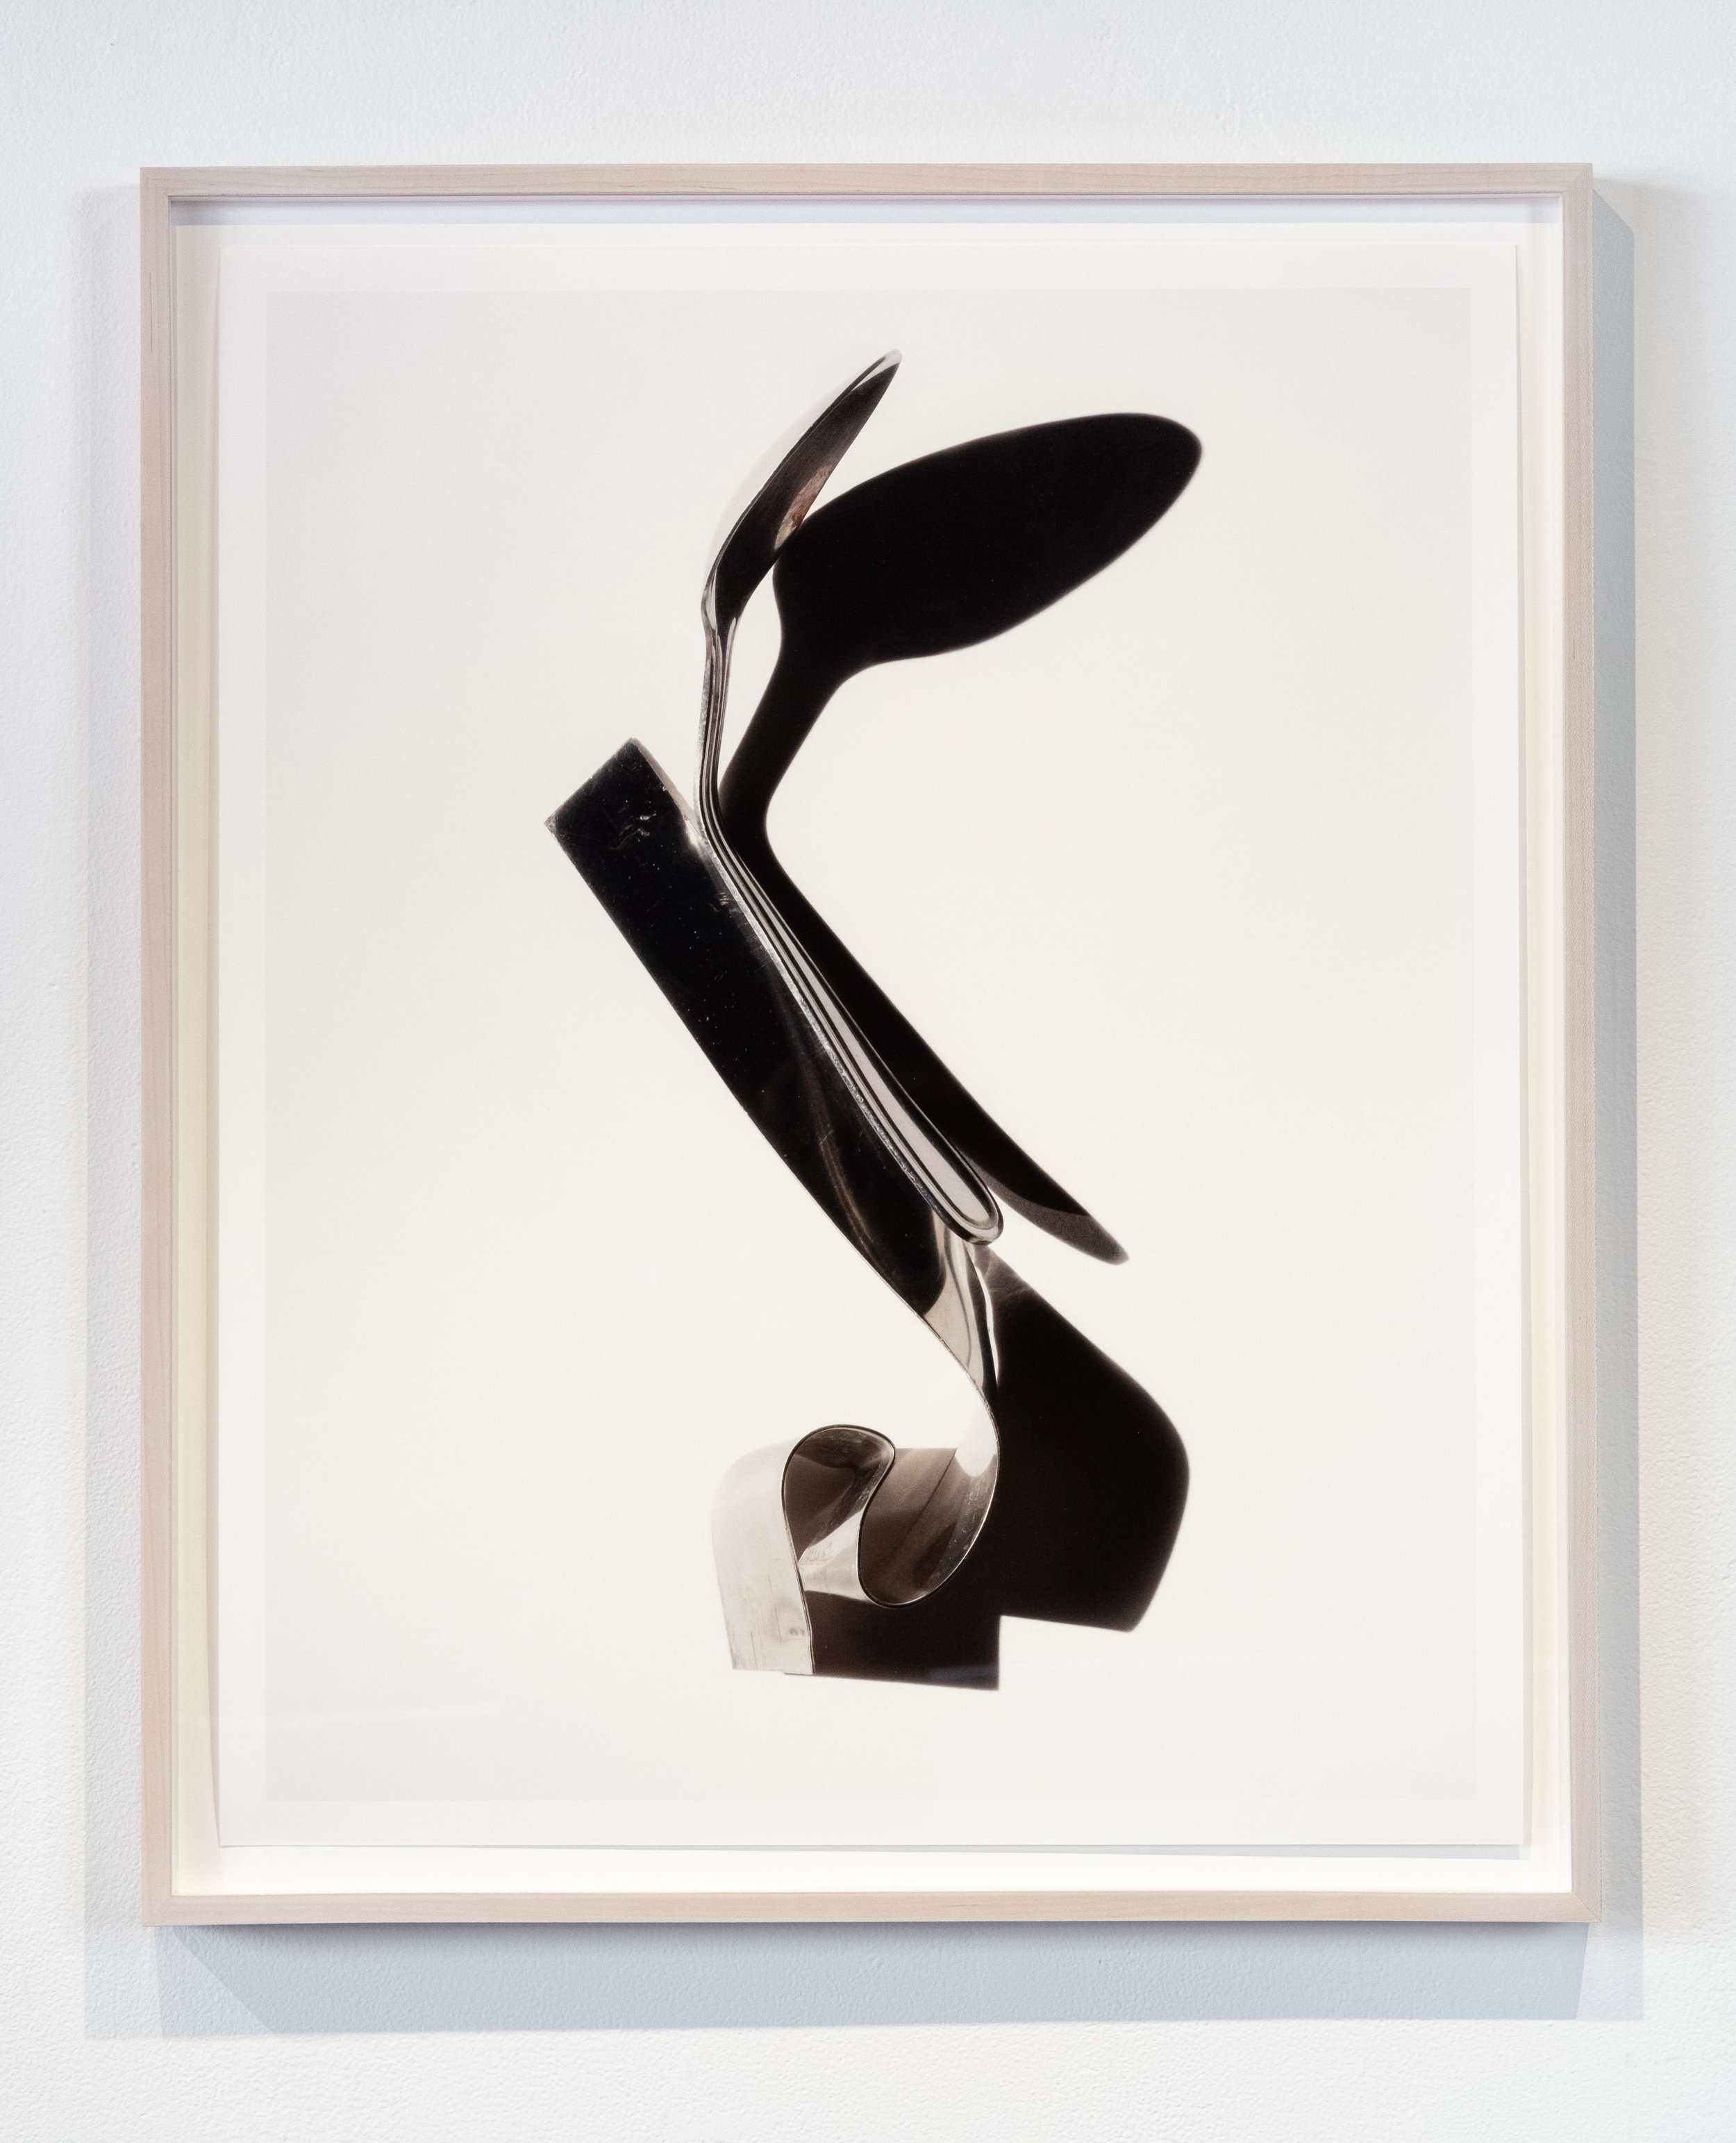  Spoon and Twisted Metal  archival pigment print 20x25 inches 